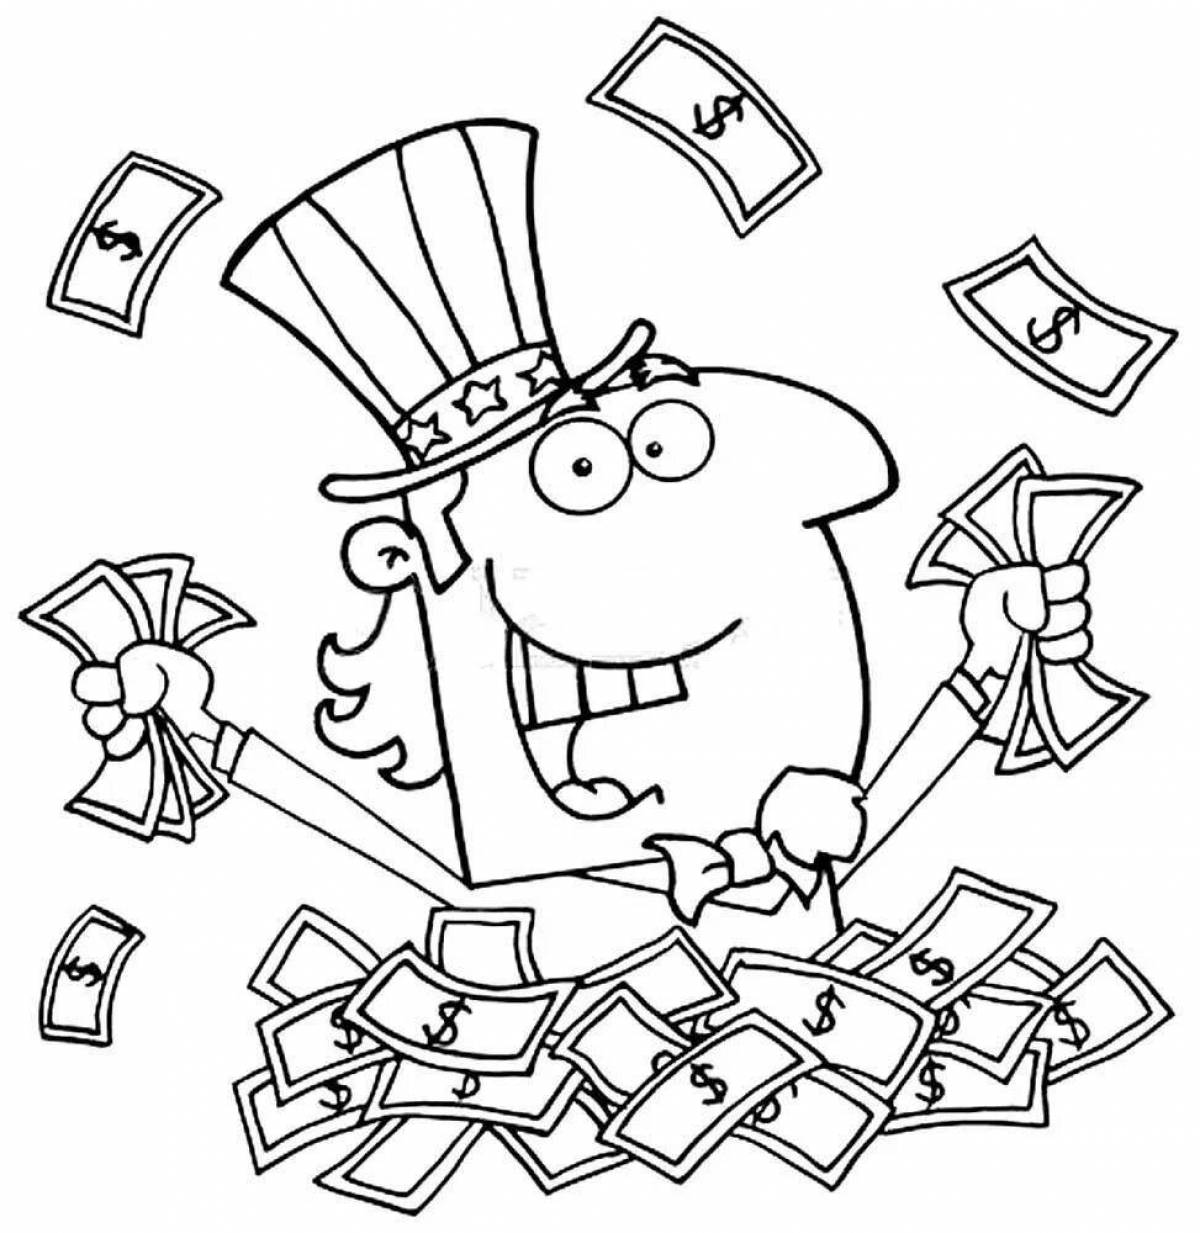 Financial literacy for primary school children coloring page